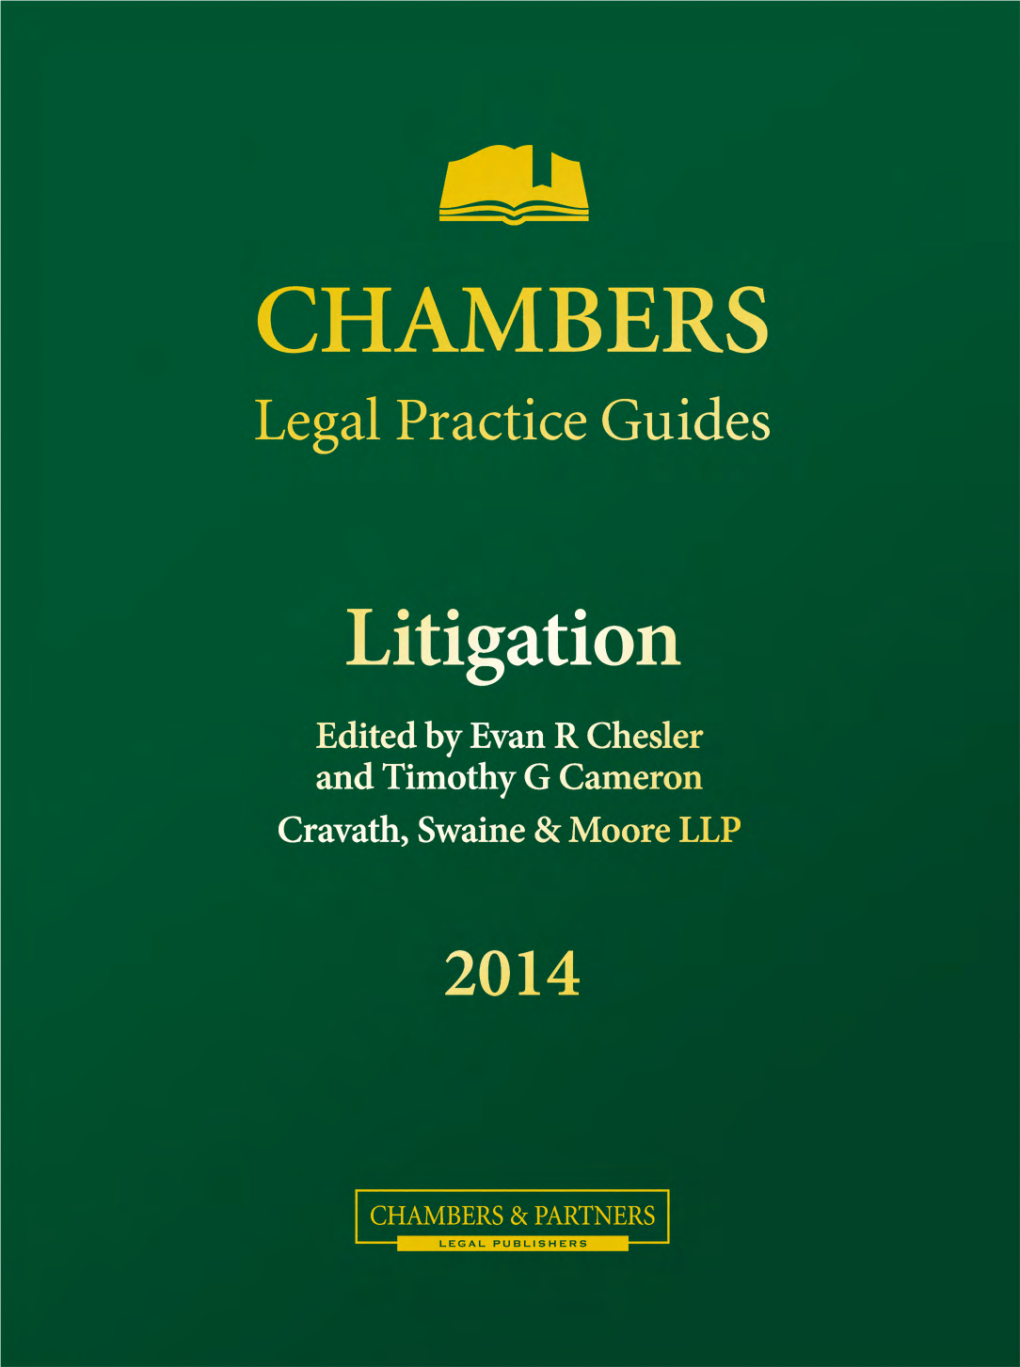 Litigation Edited by Evan R Chesler and Timothy G Cameron Cravath, Swaine & Moore LLP